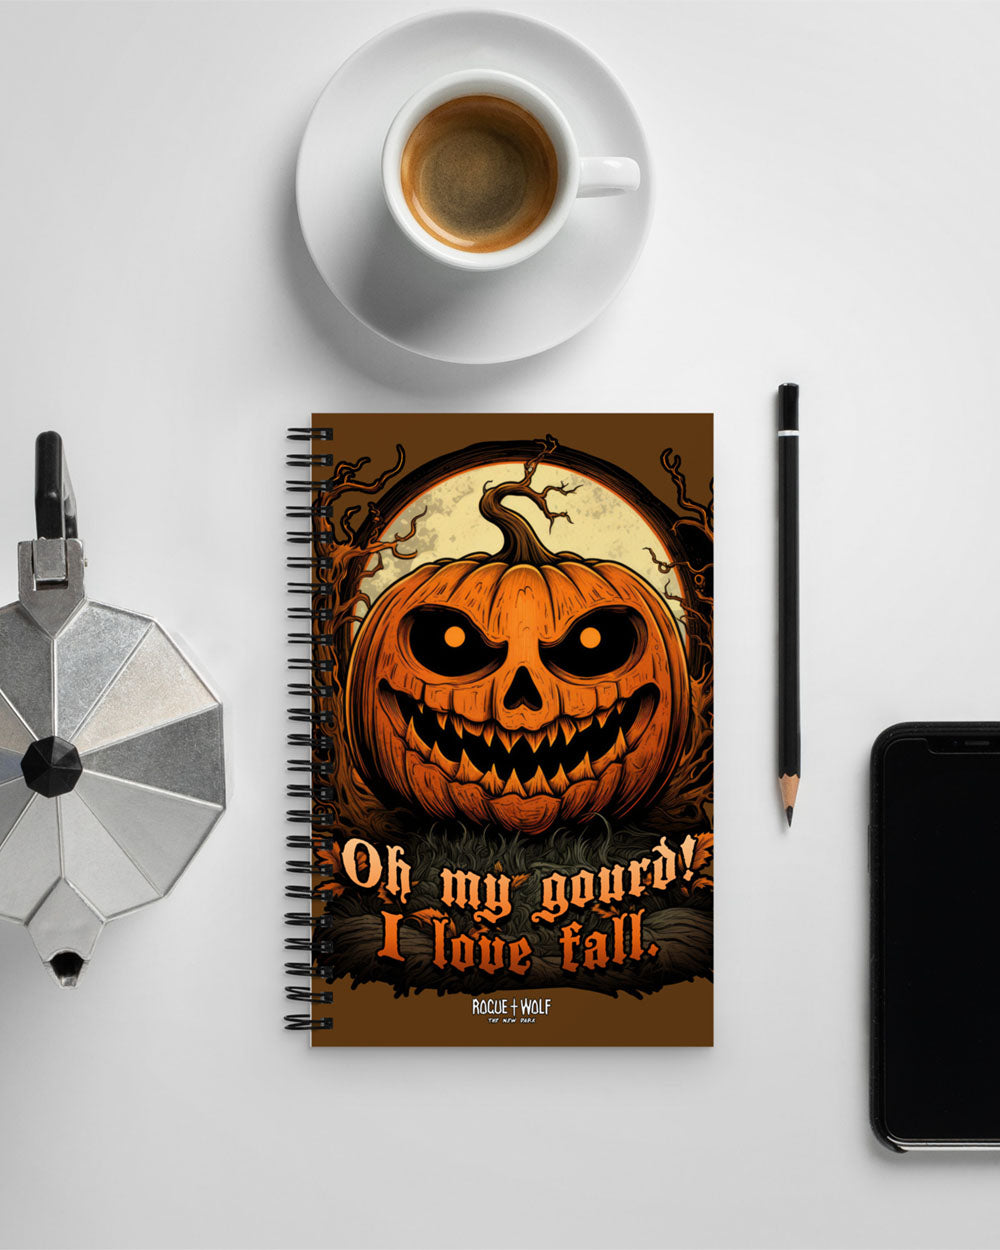 OMG! Spiral Notebook - Gothic Stationery for Home Office School & College Cute Spooky Journal For Women Halloween Gifts